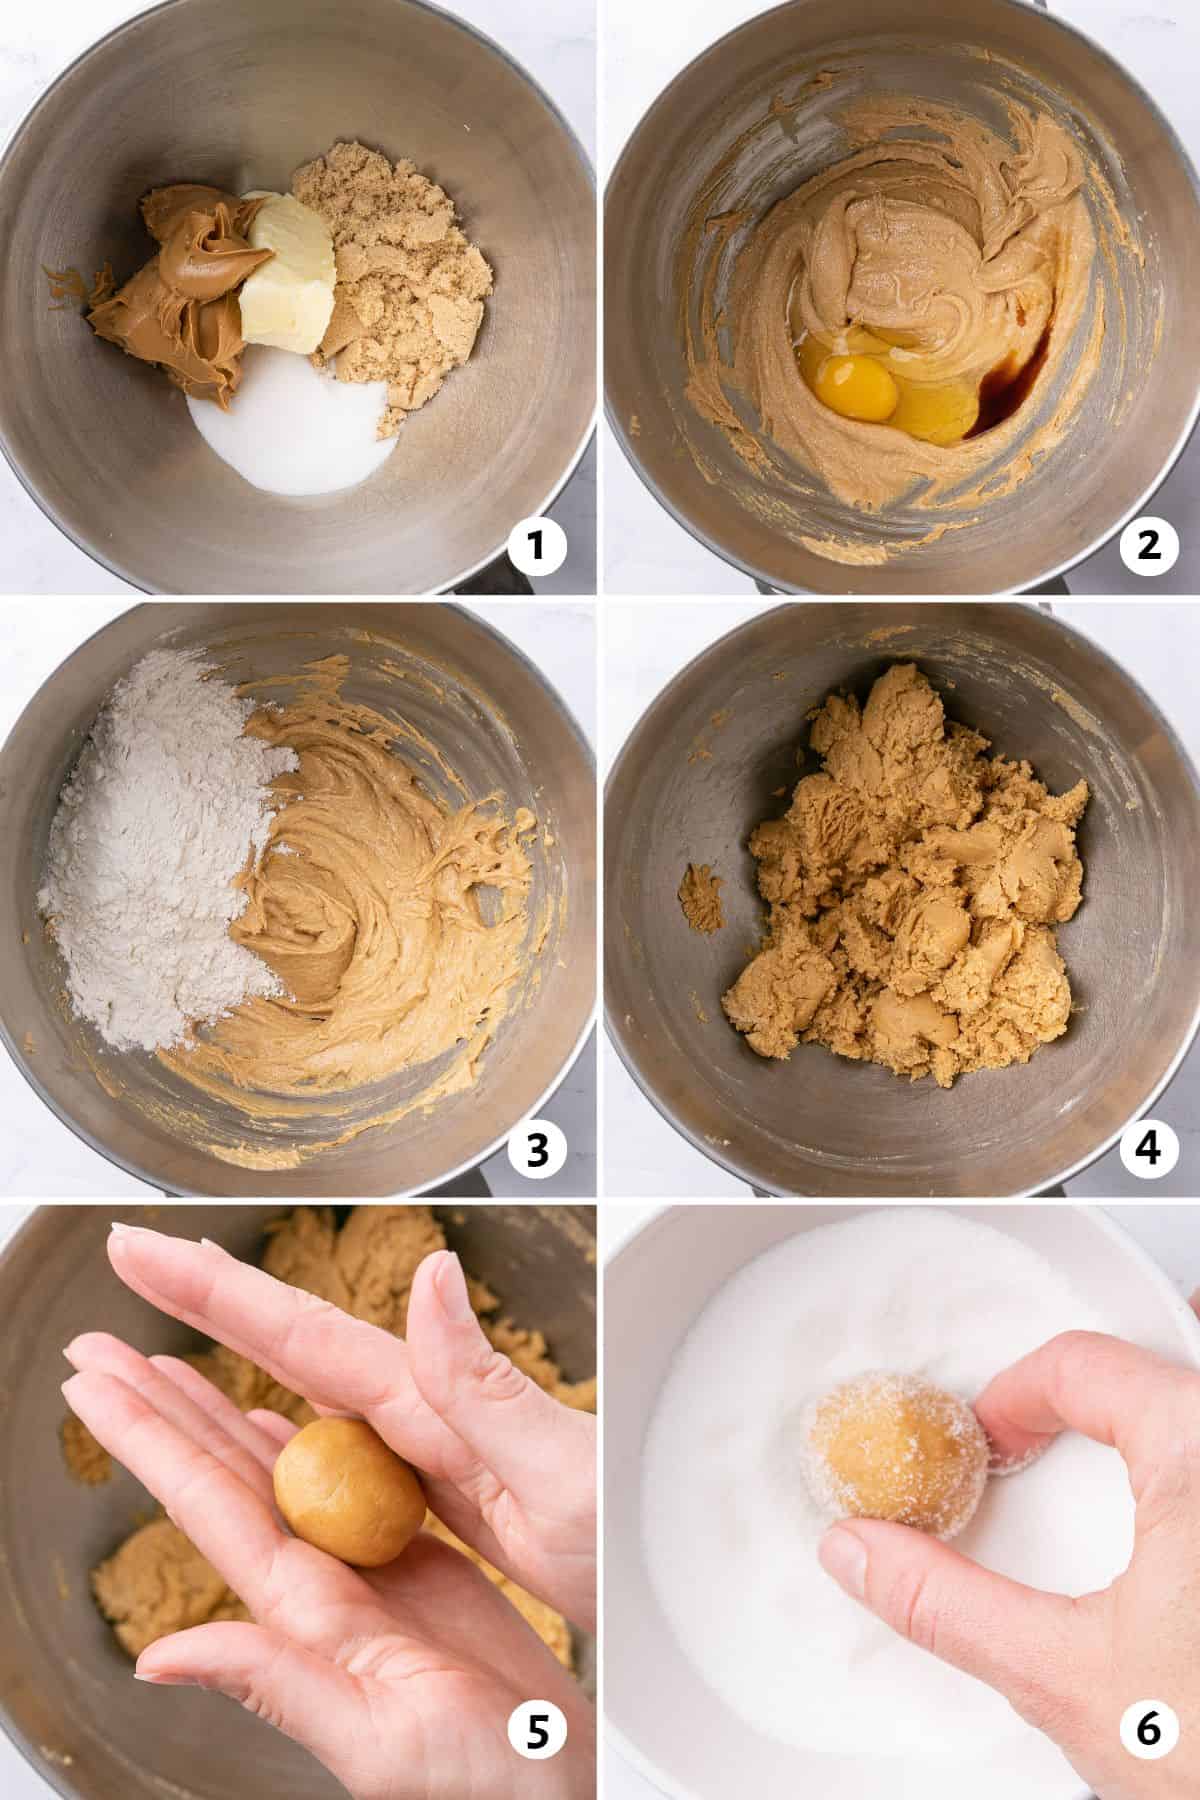 6 image collage making cookie dough: 1- butter, peanut butter, and sugars in the bowl of a stand mixer before creaming, 2- after creaming with an egg and vanilla added, 3- after combining with dry ingredients on top, 4- final dough with no flour streaks remaining, 5- hands rolling a dough ball in between palms, 6- hand coating a dough ball in sugar.